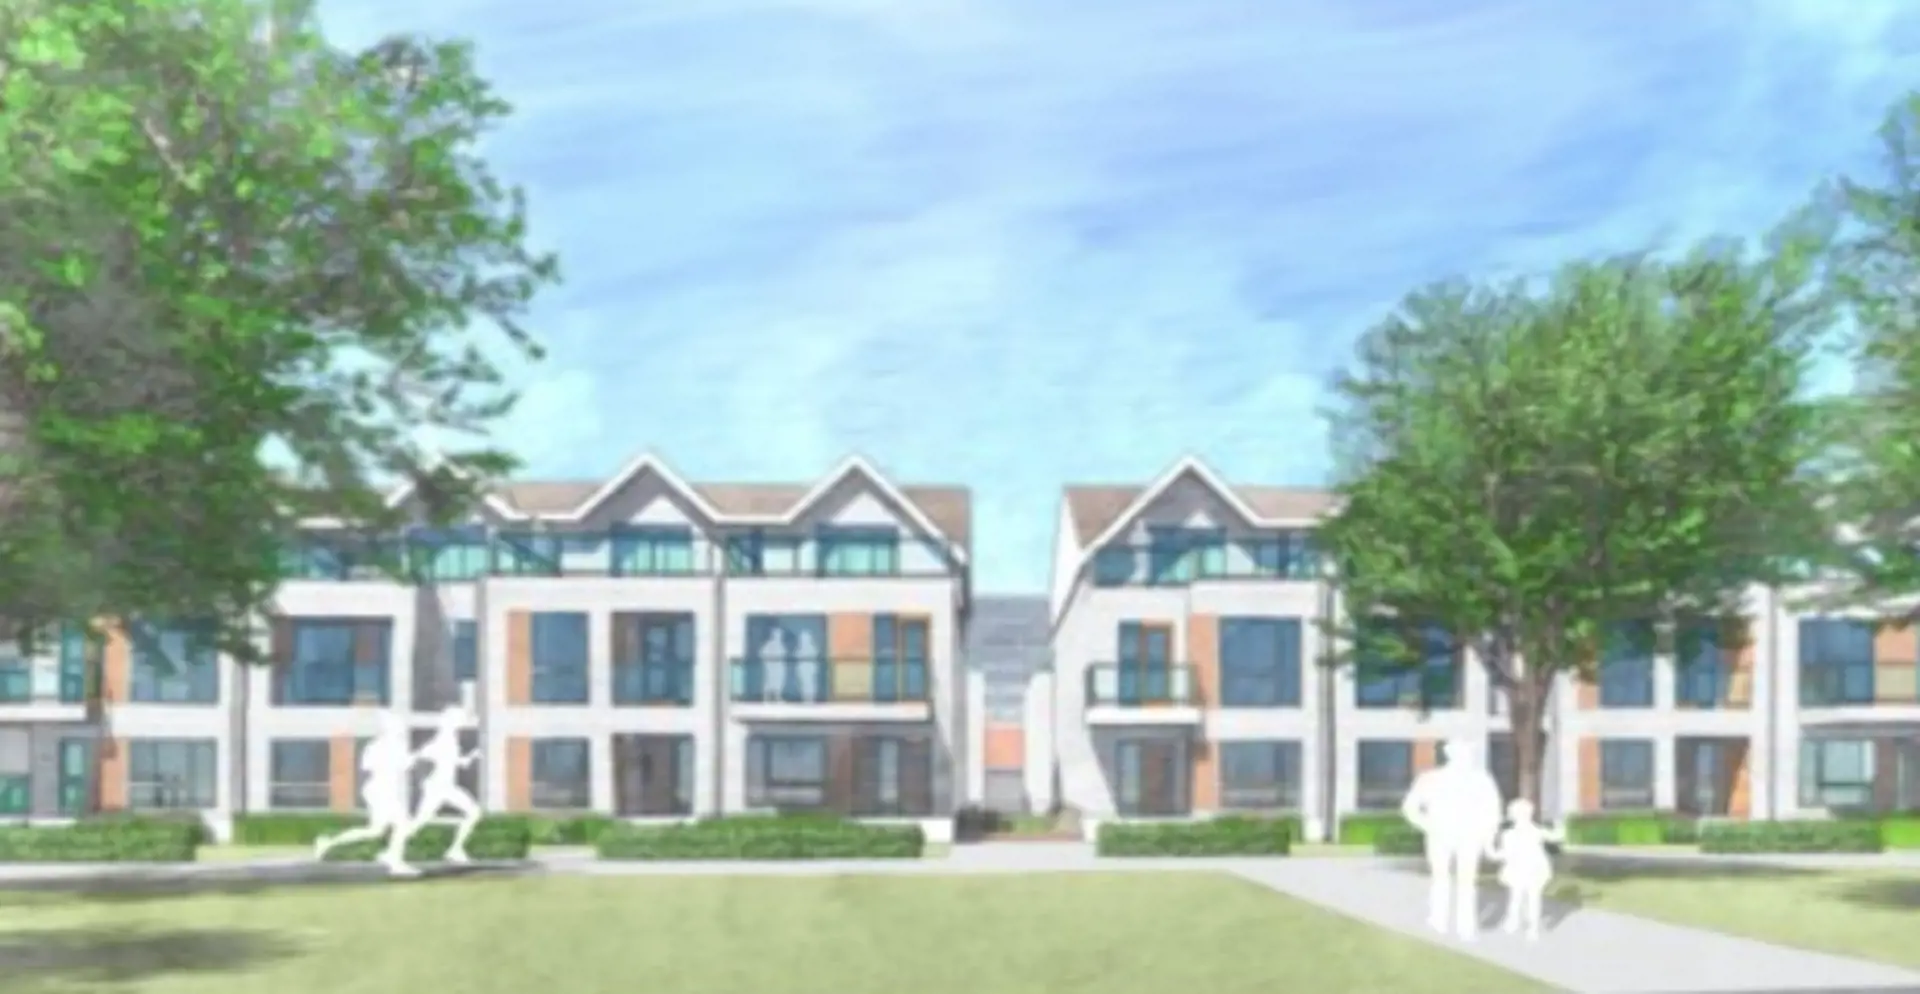 Exterior rendering of Sunshine Harbour townhomes